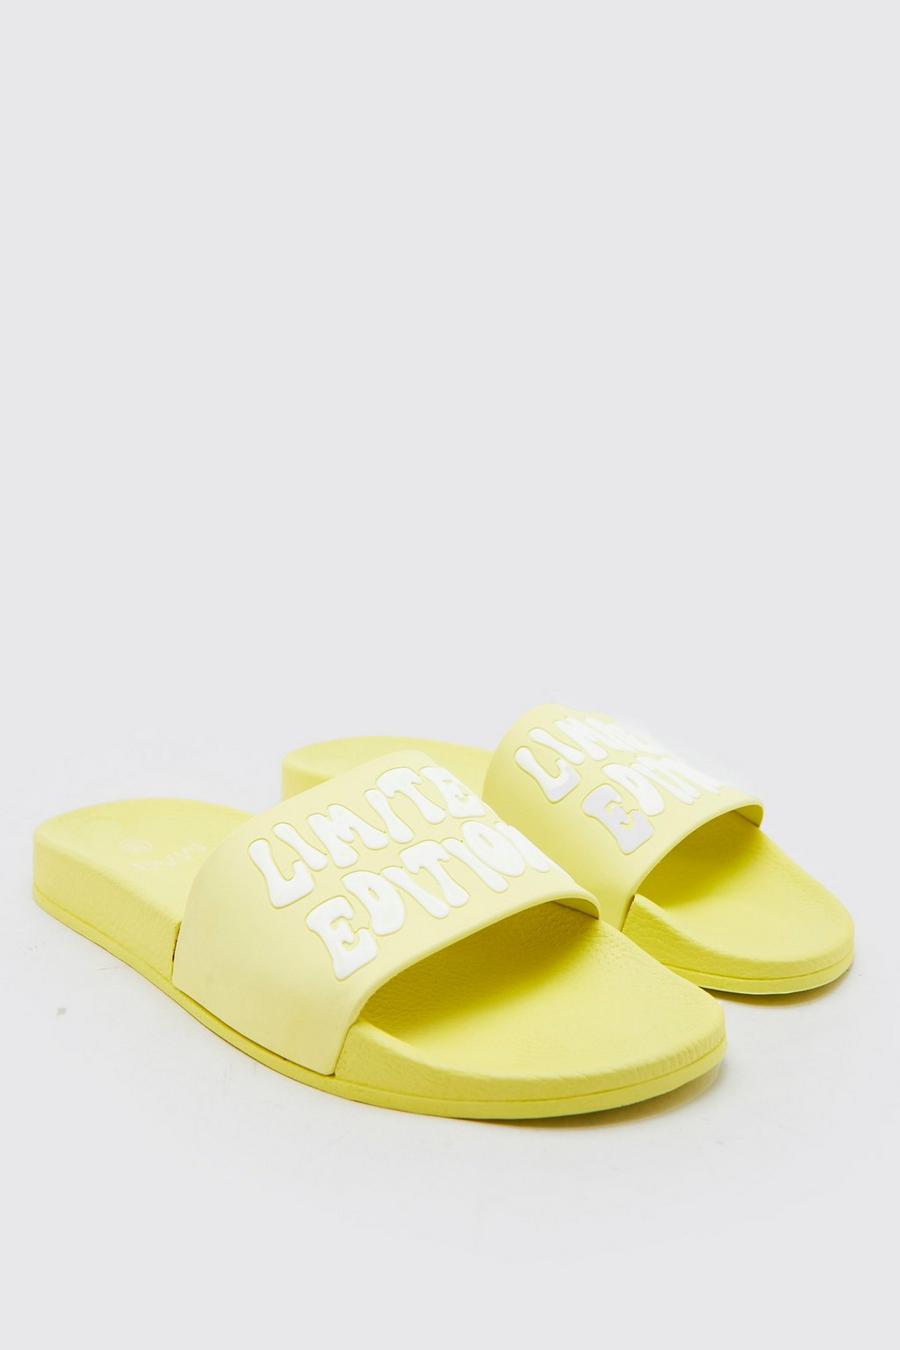 Lime green Limited Edition Slippers